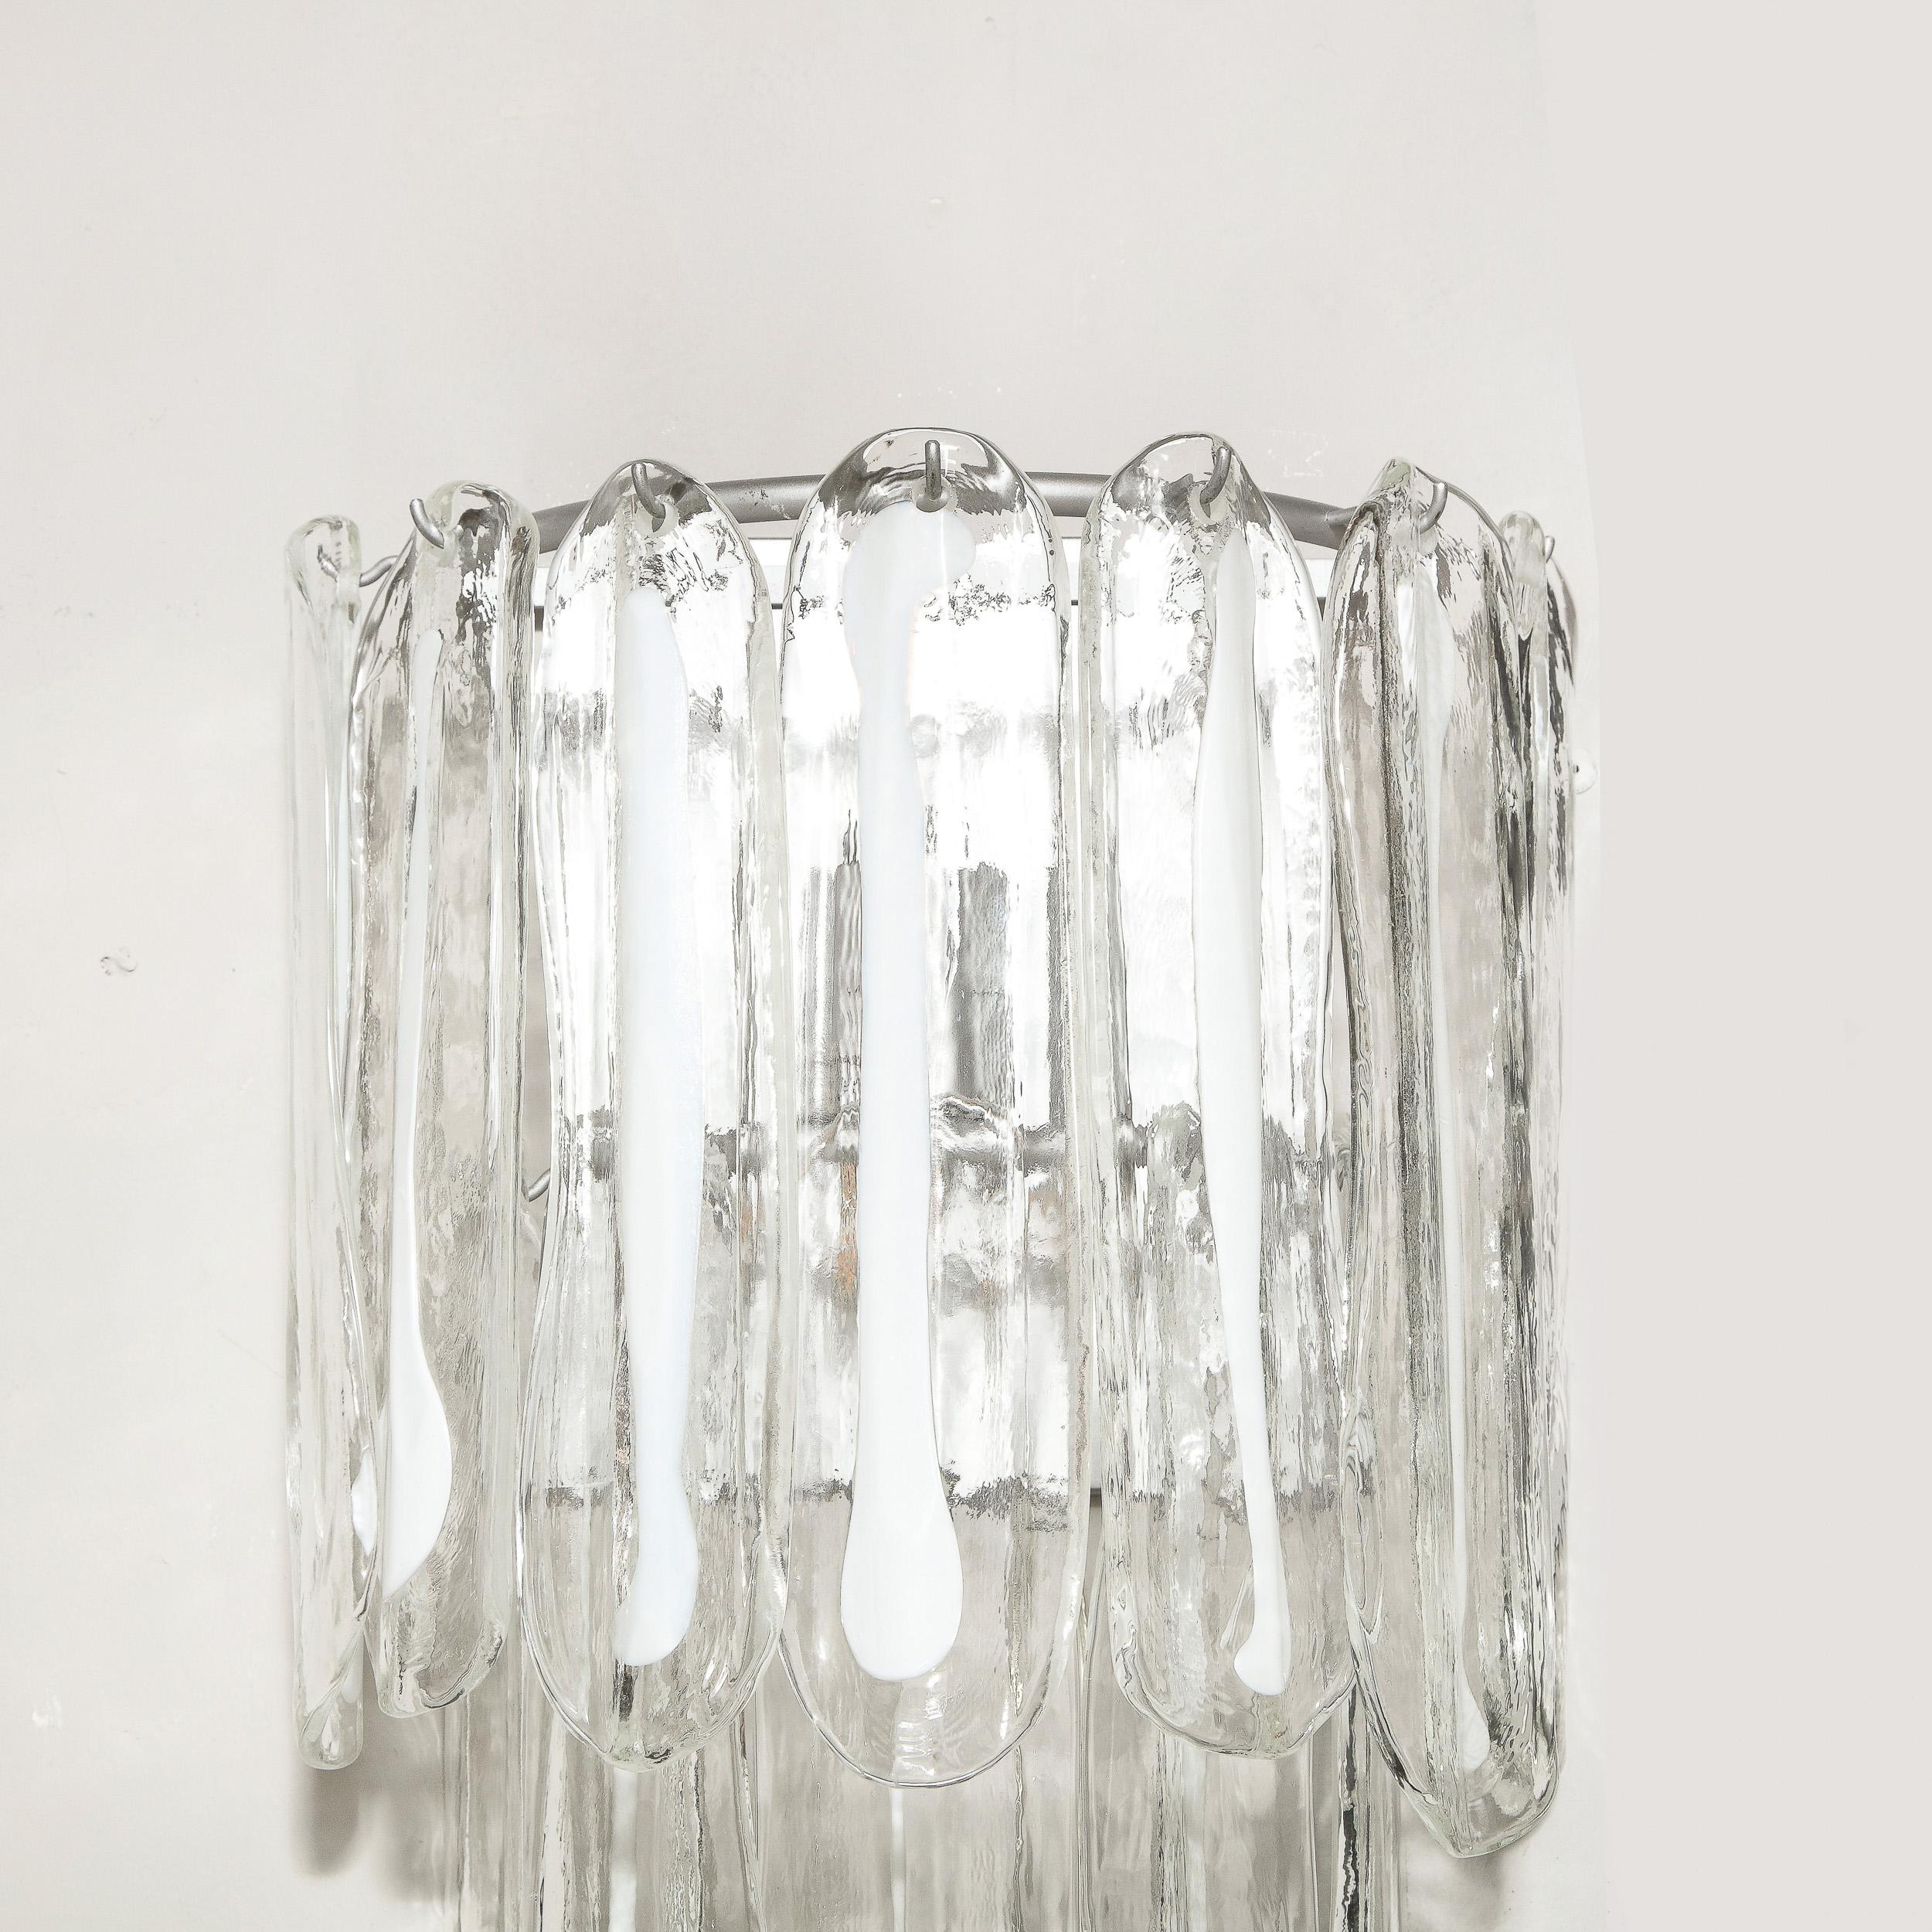 Pair of Mid-Century Modern Translucent & White Murano Glass Sconces by Mazzega For Sale 7